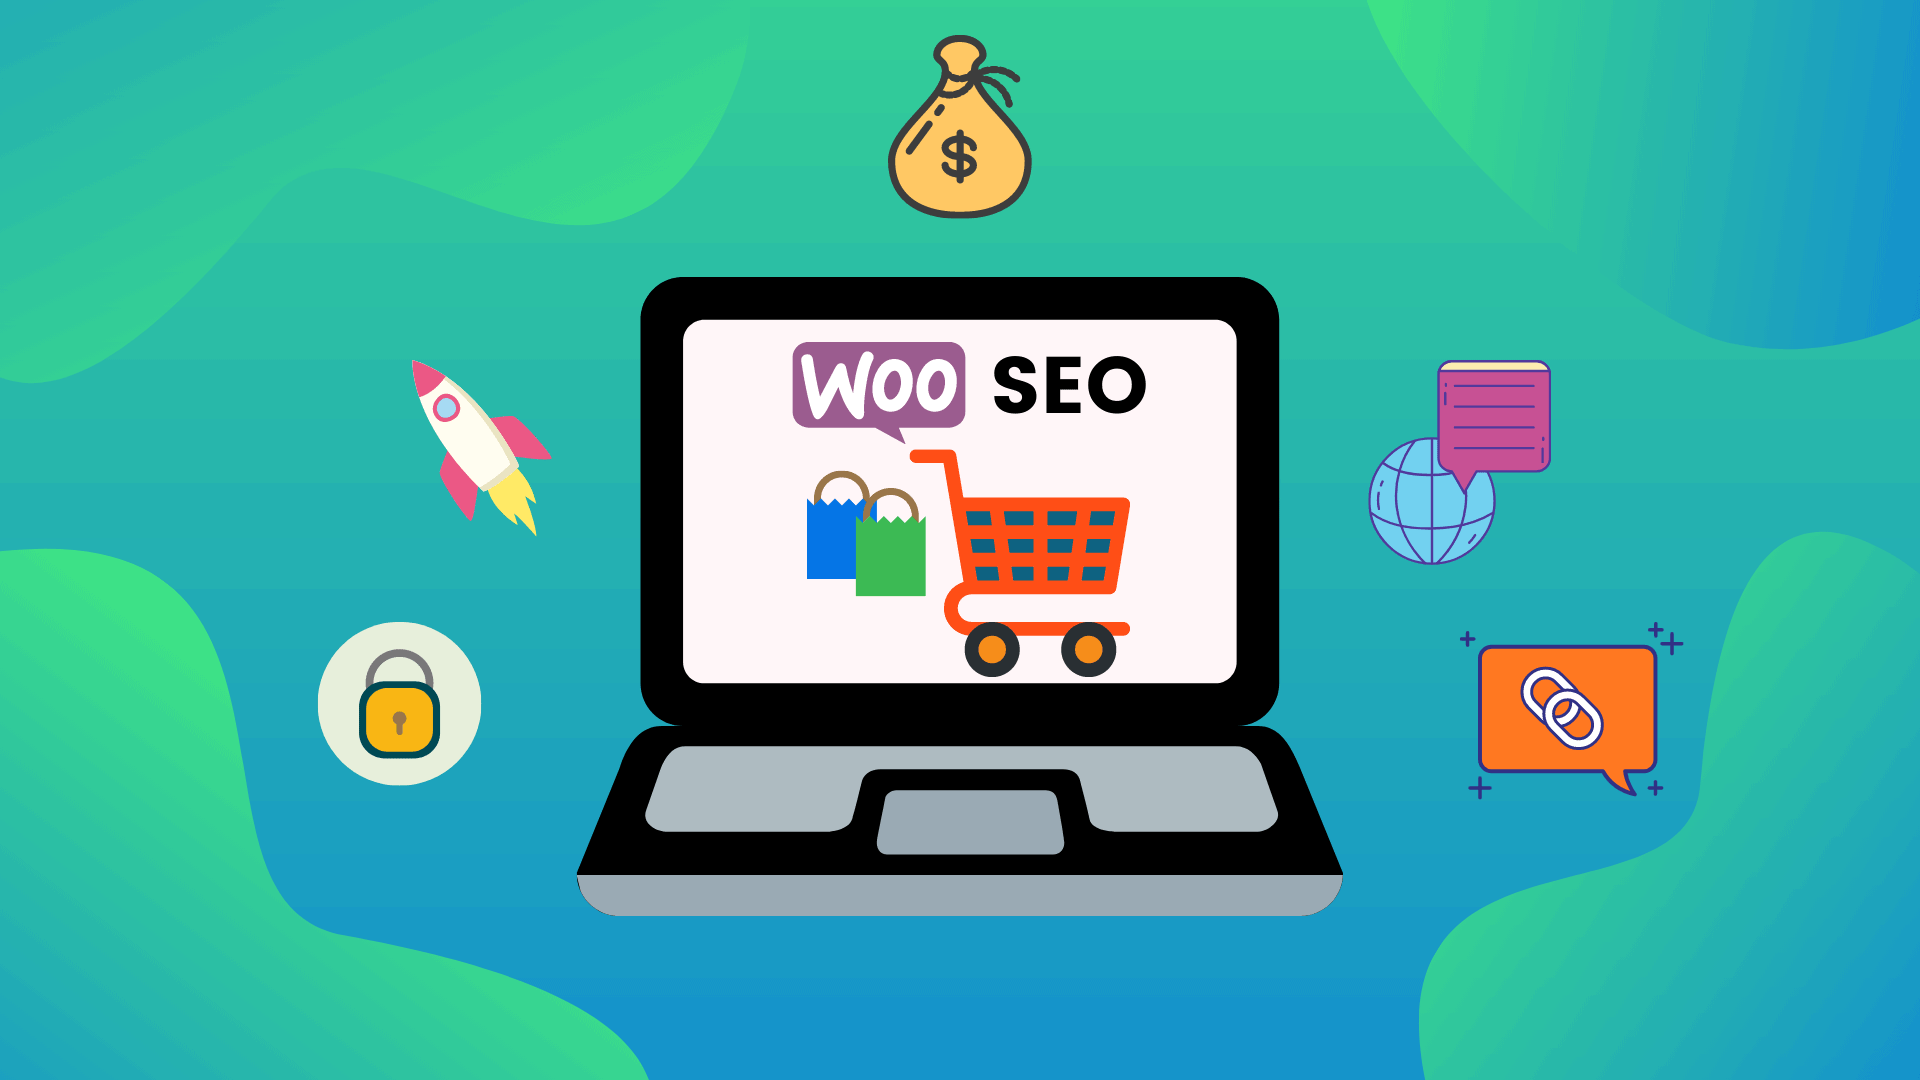 WooCommerce SEO Guide: 9 best ways to rank high in Google